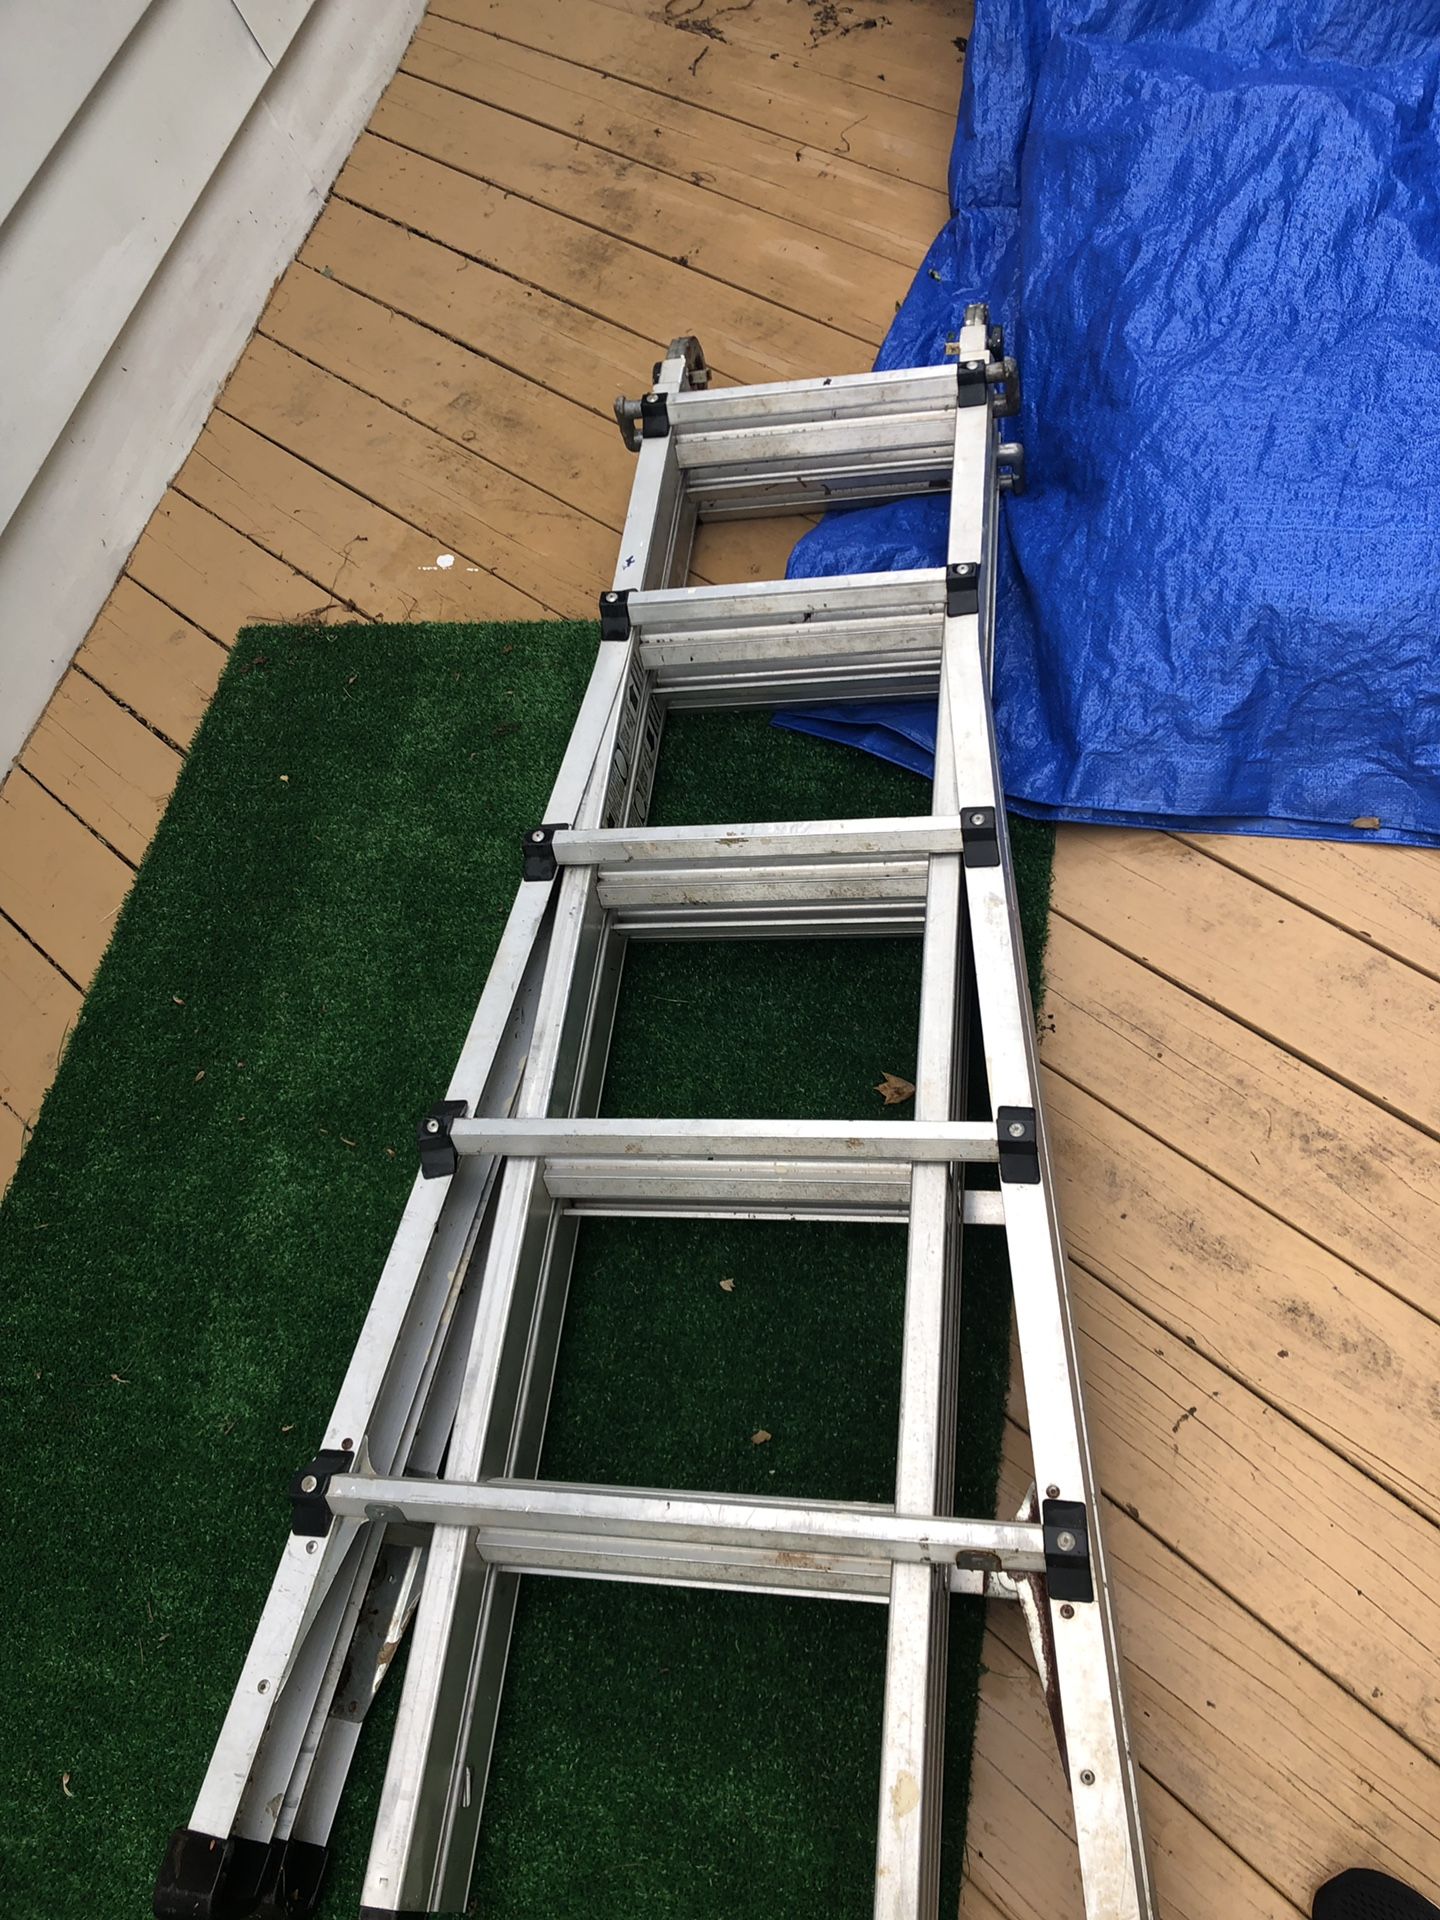 Ladder with extension